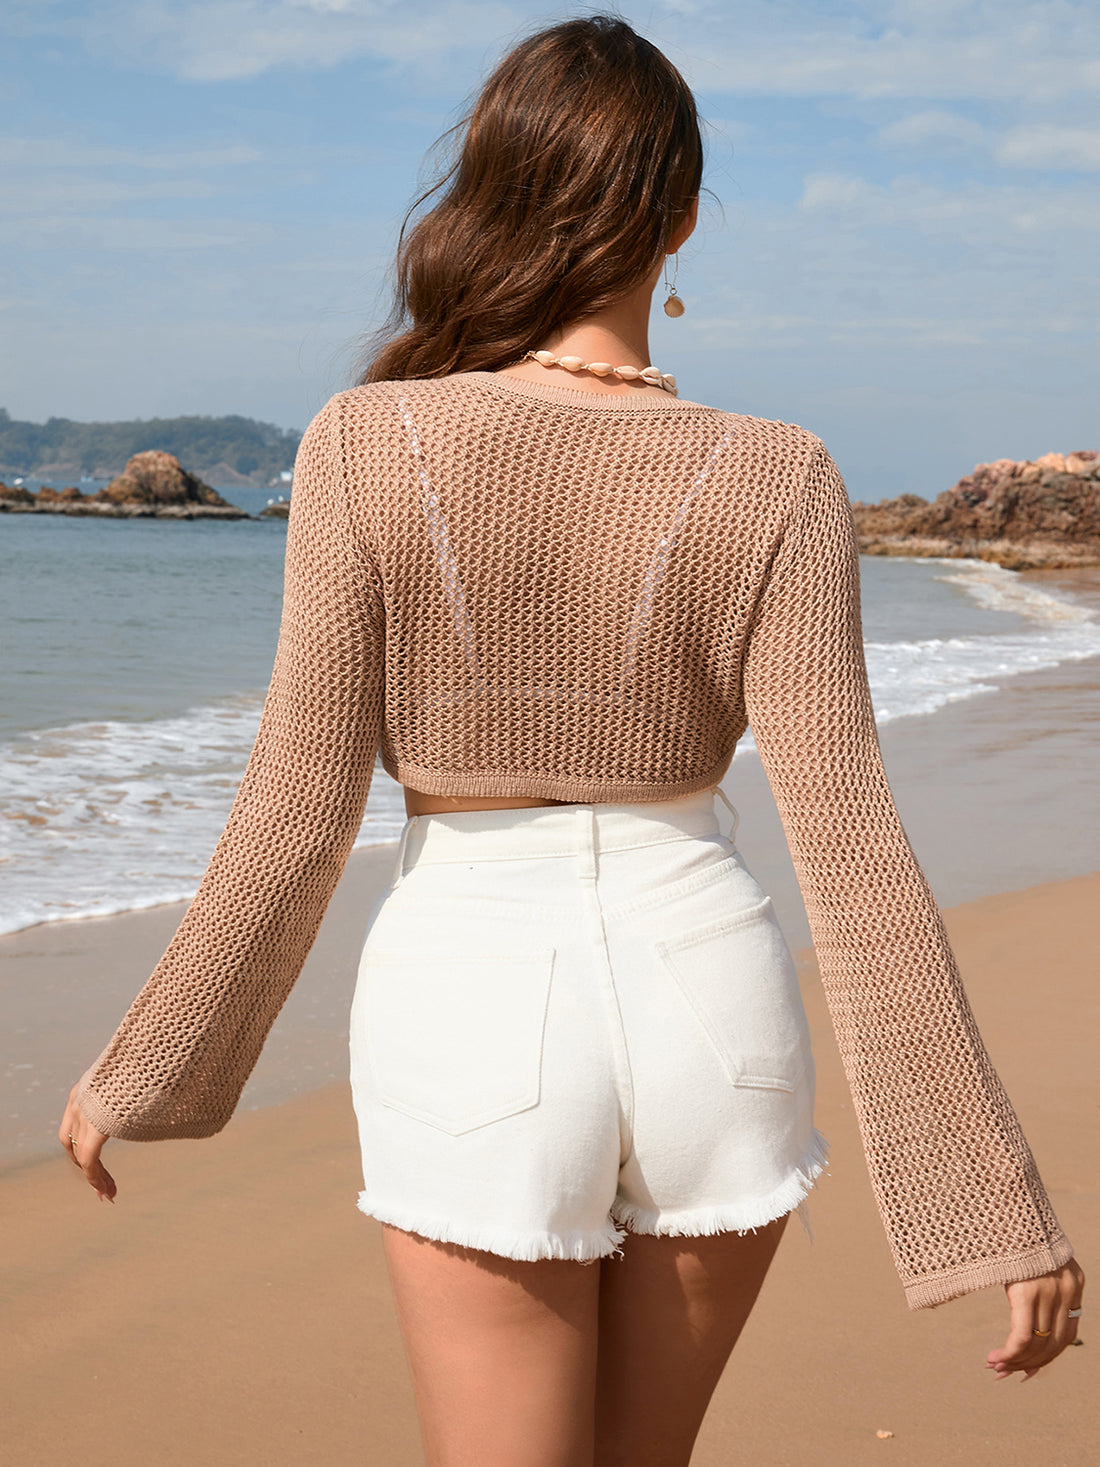 Openwork Long Sleeve Cover-Up